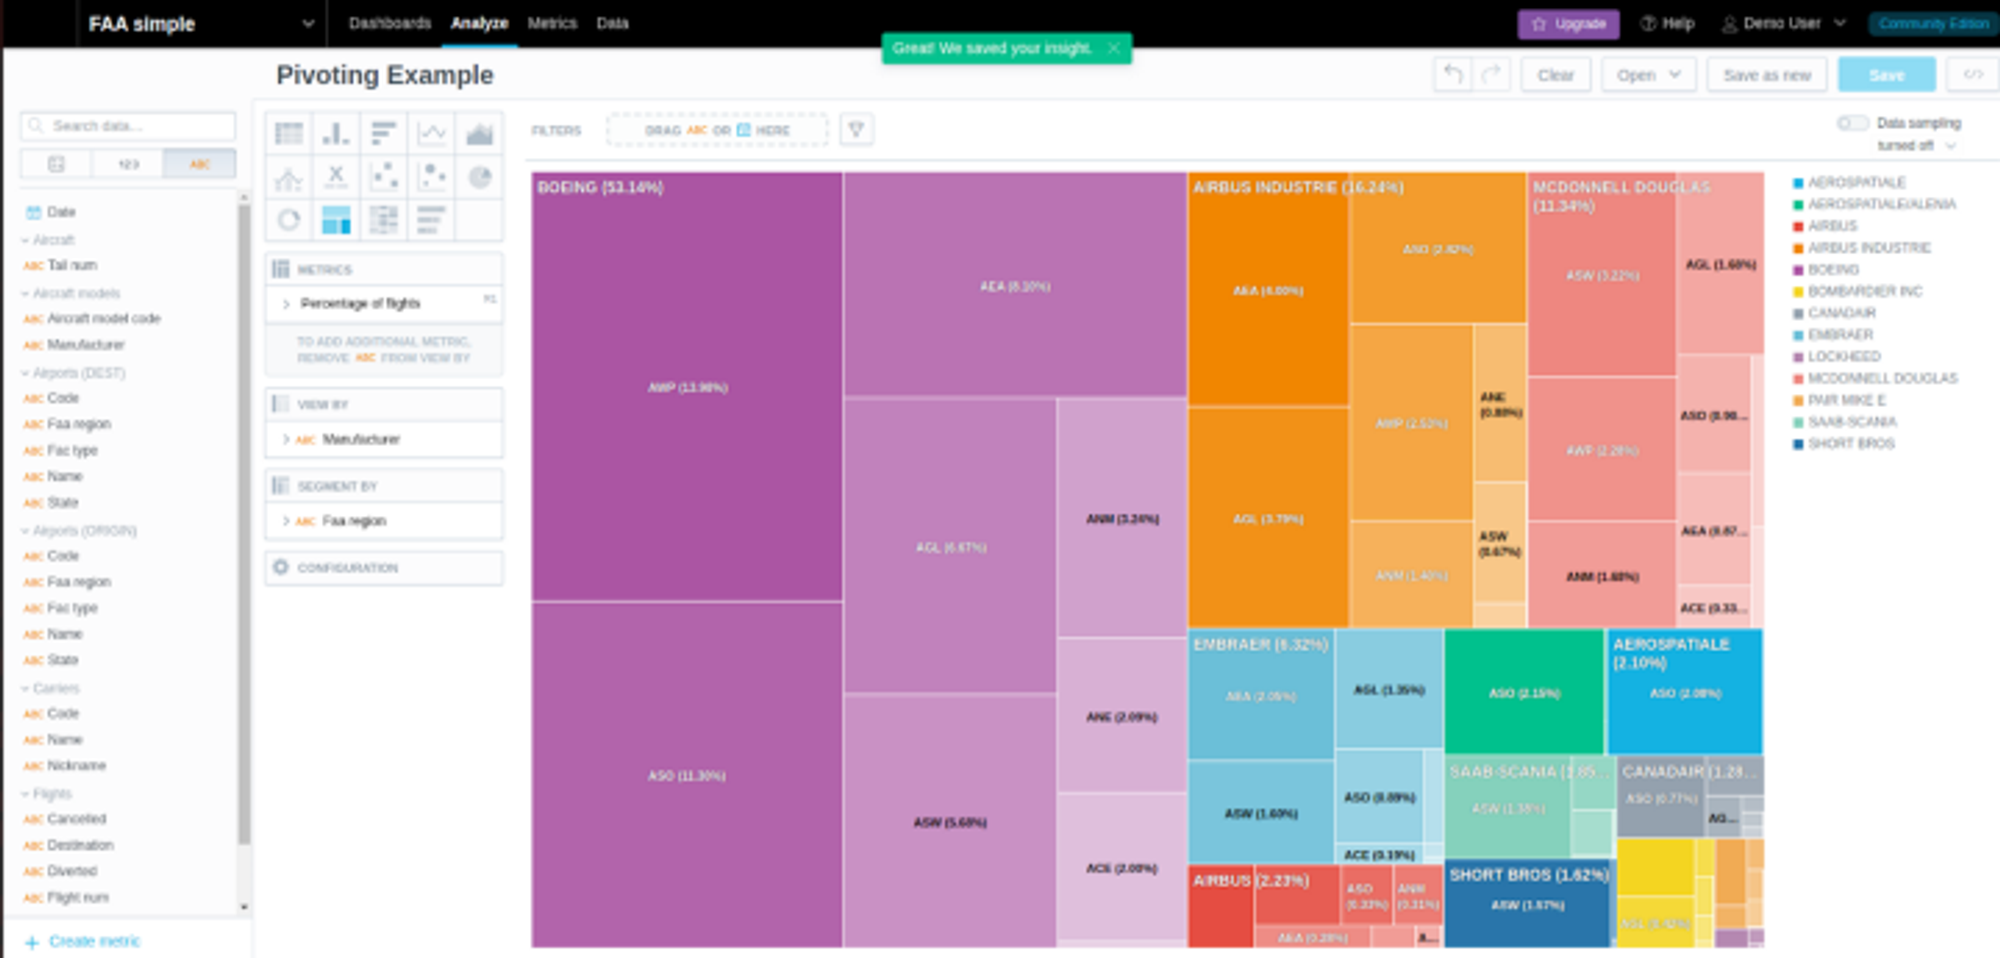 The same pivot (by FAA region) is displayed as a nice TreeMap.